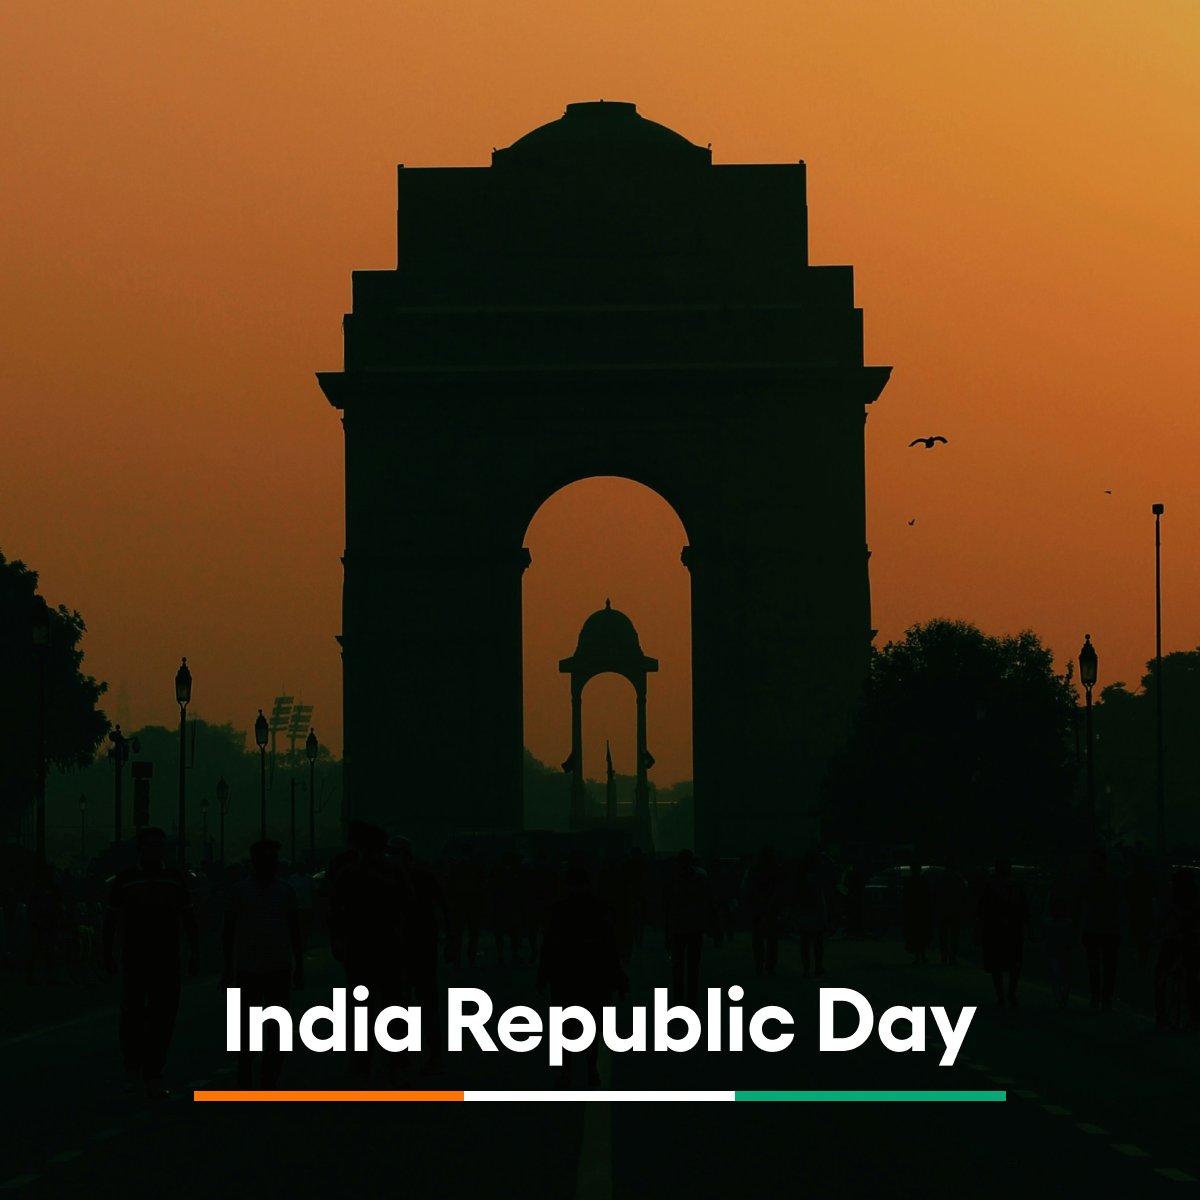 Happy India Republic Day to our colleagues in India and around the globe who celebrate this day!